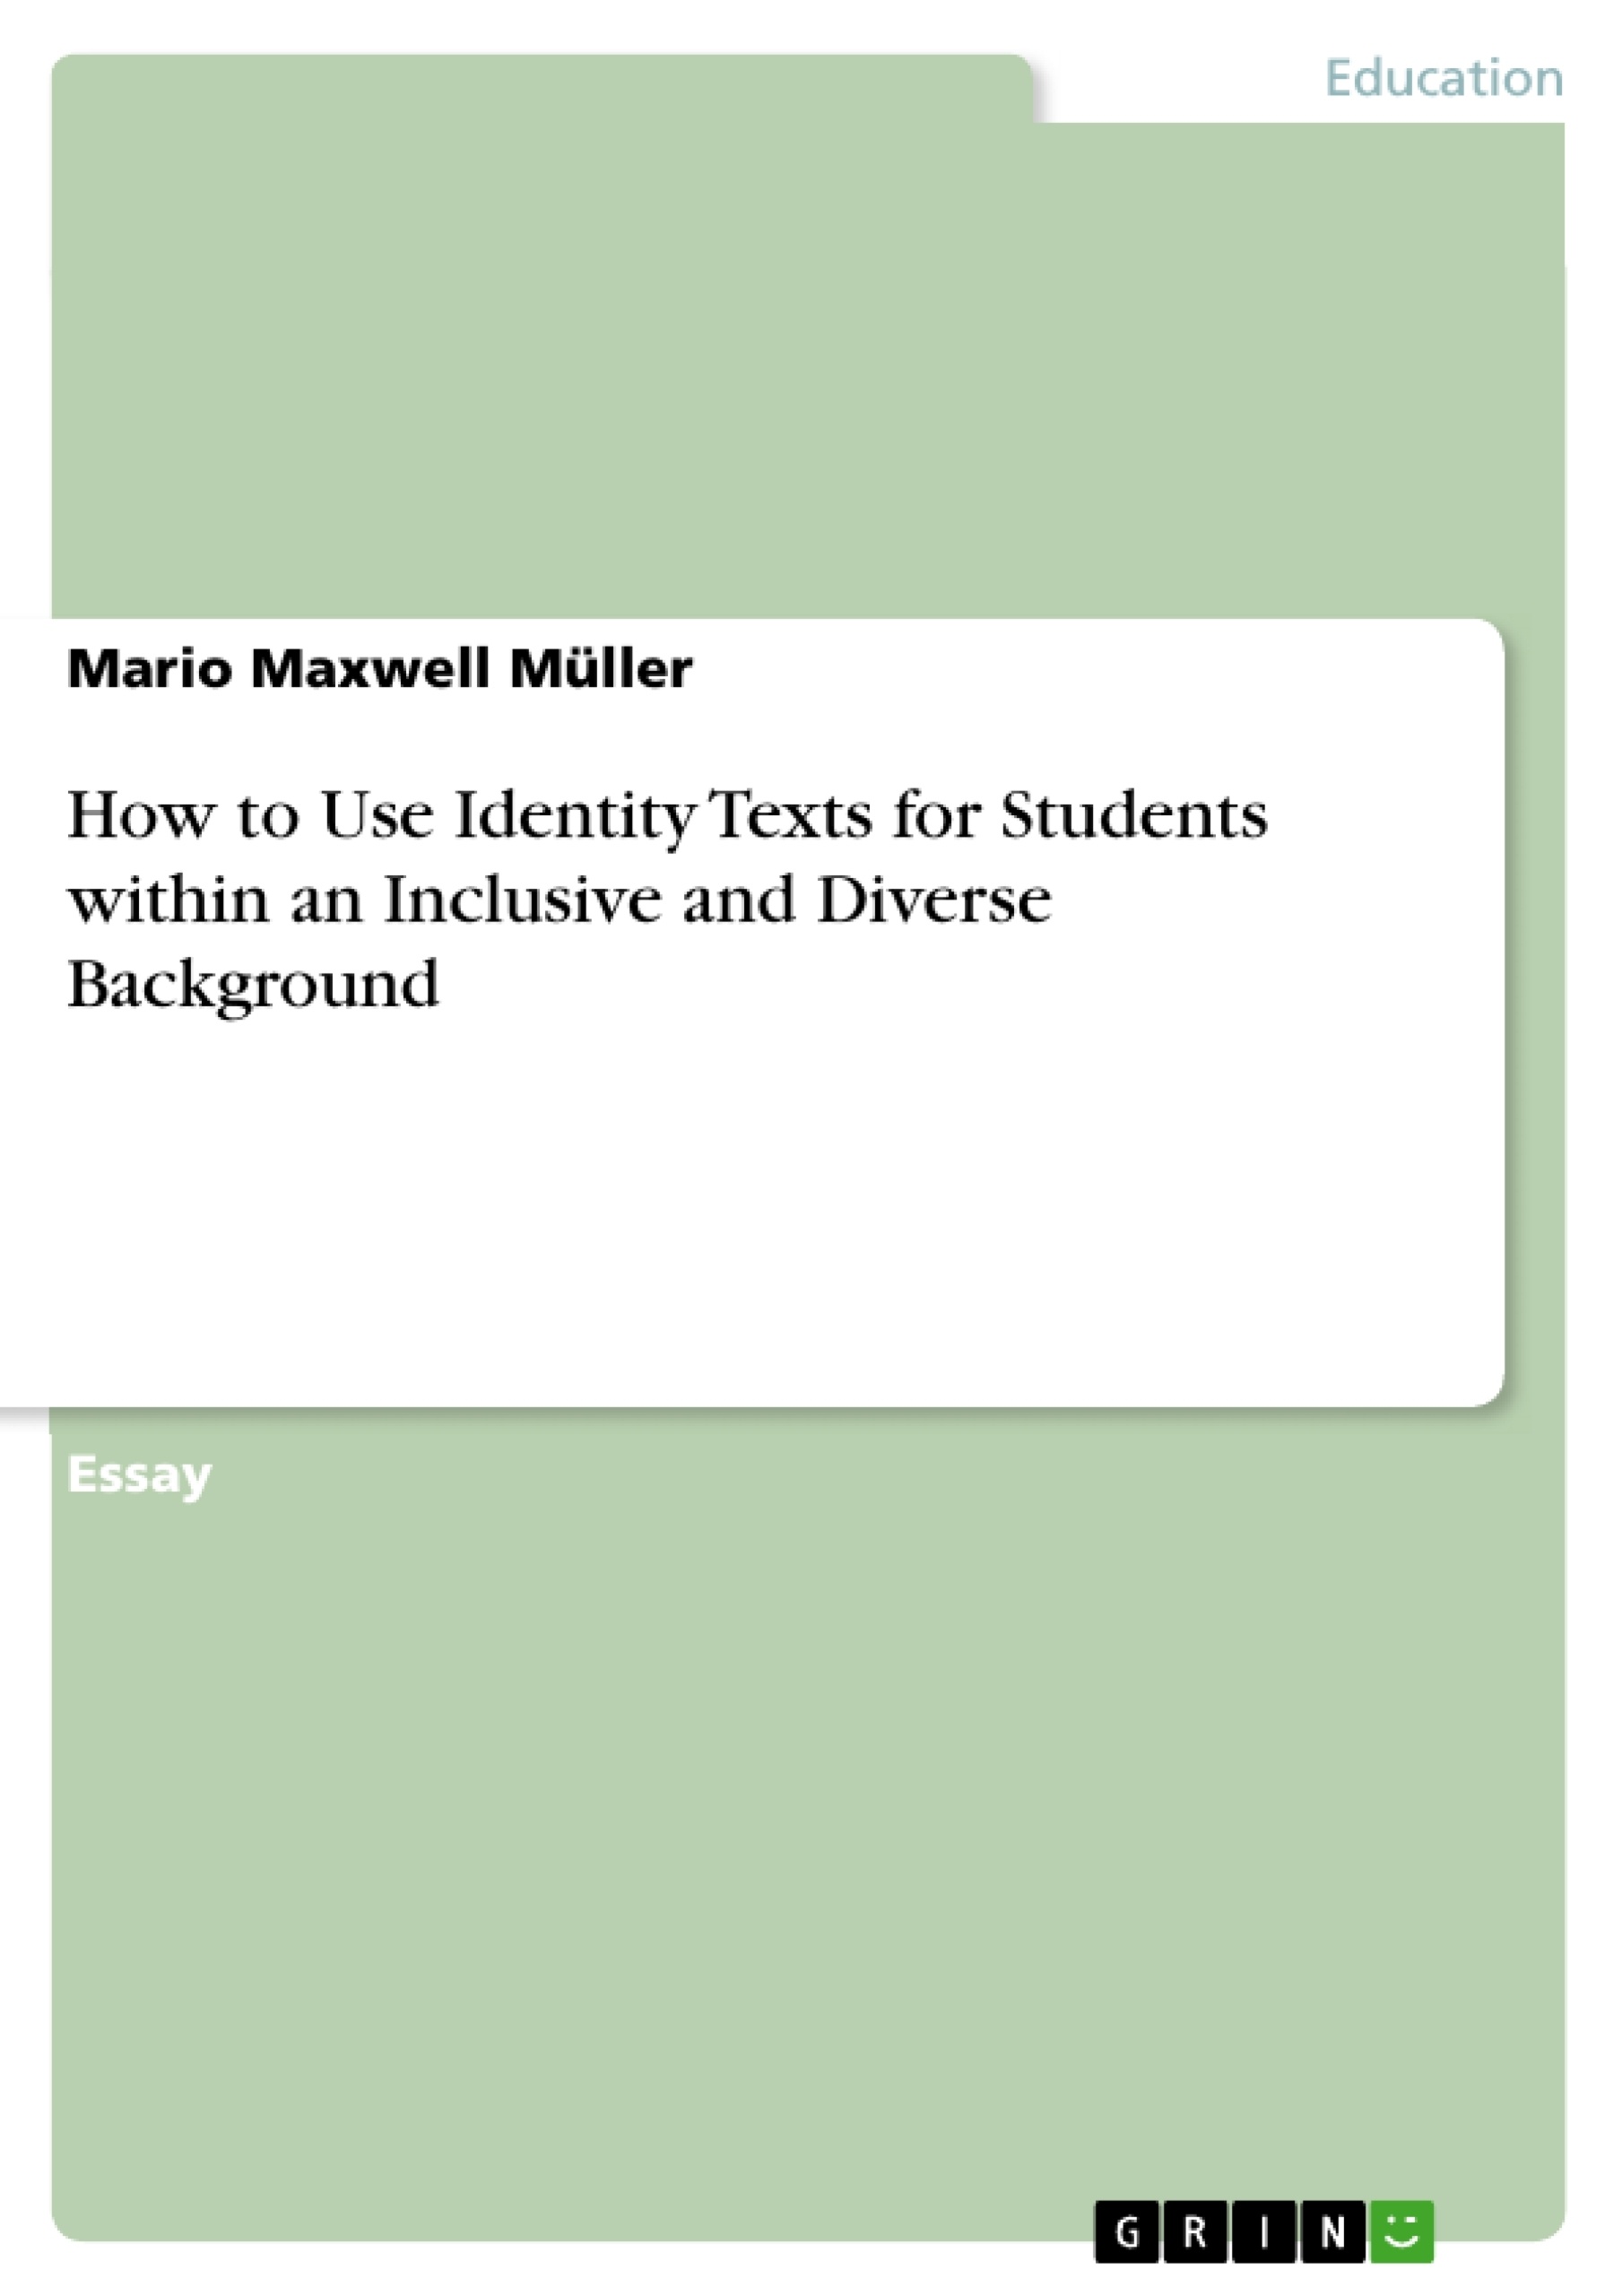 Title: How to Use Identity Texts for Students within an Inclusive and Diverse Background